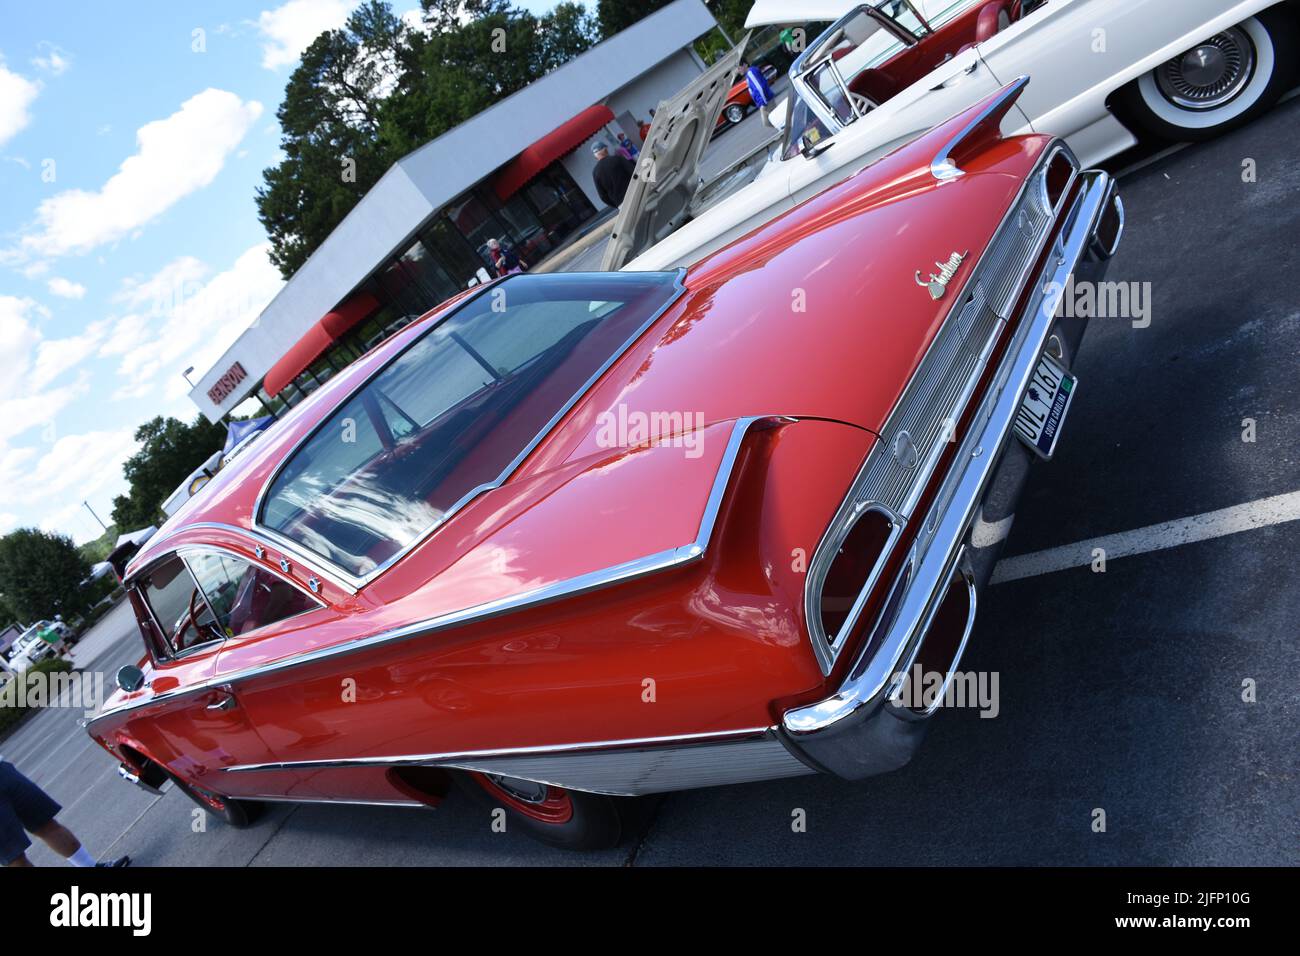 A 1960 Ford Starliner Hard Top on display at a car show. Stock Photo